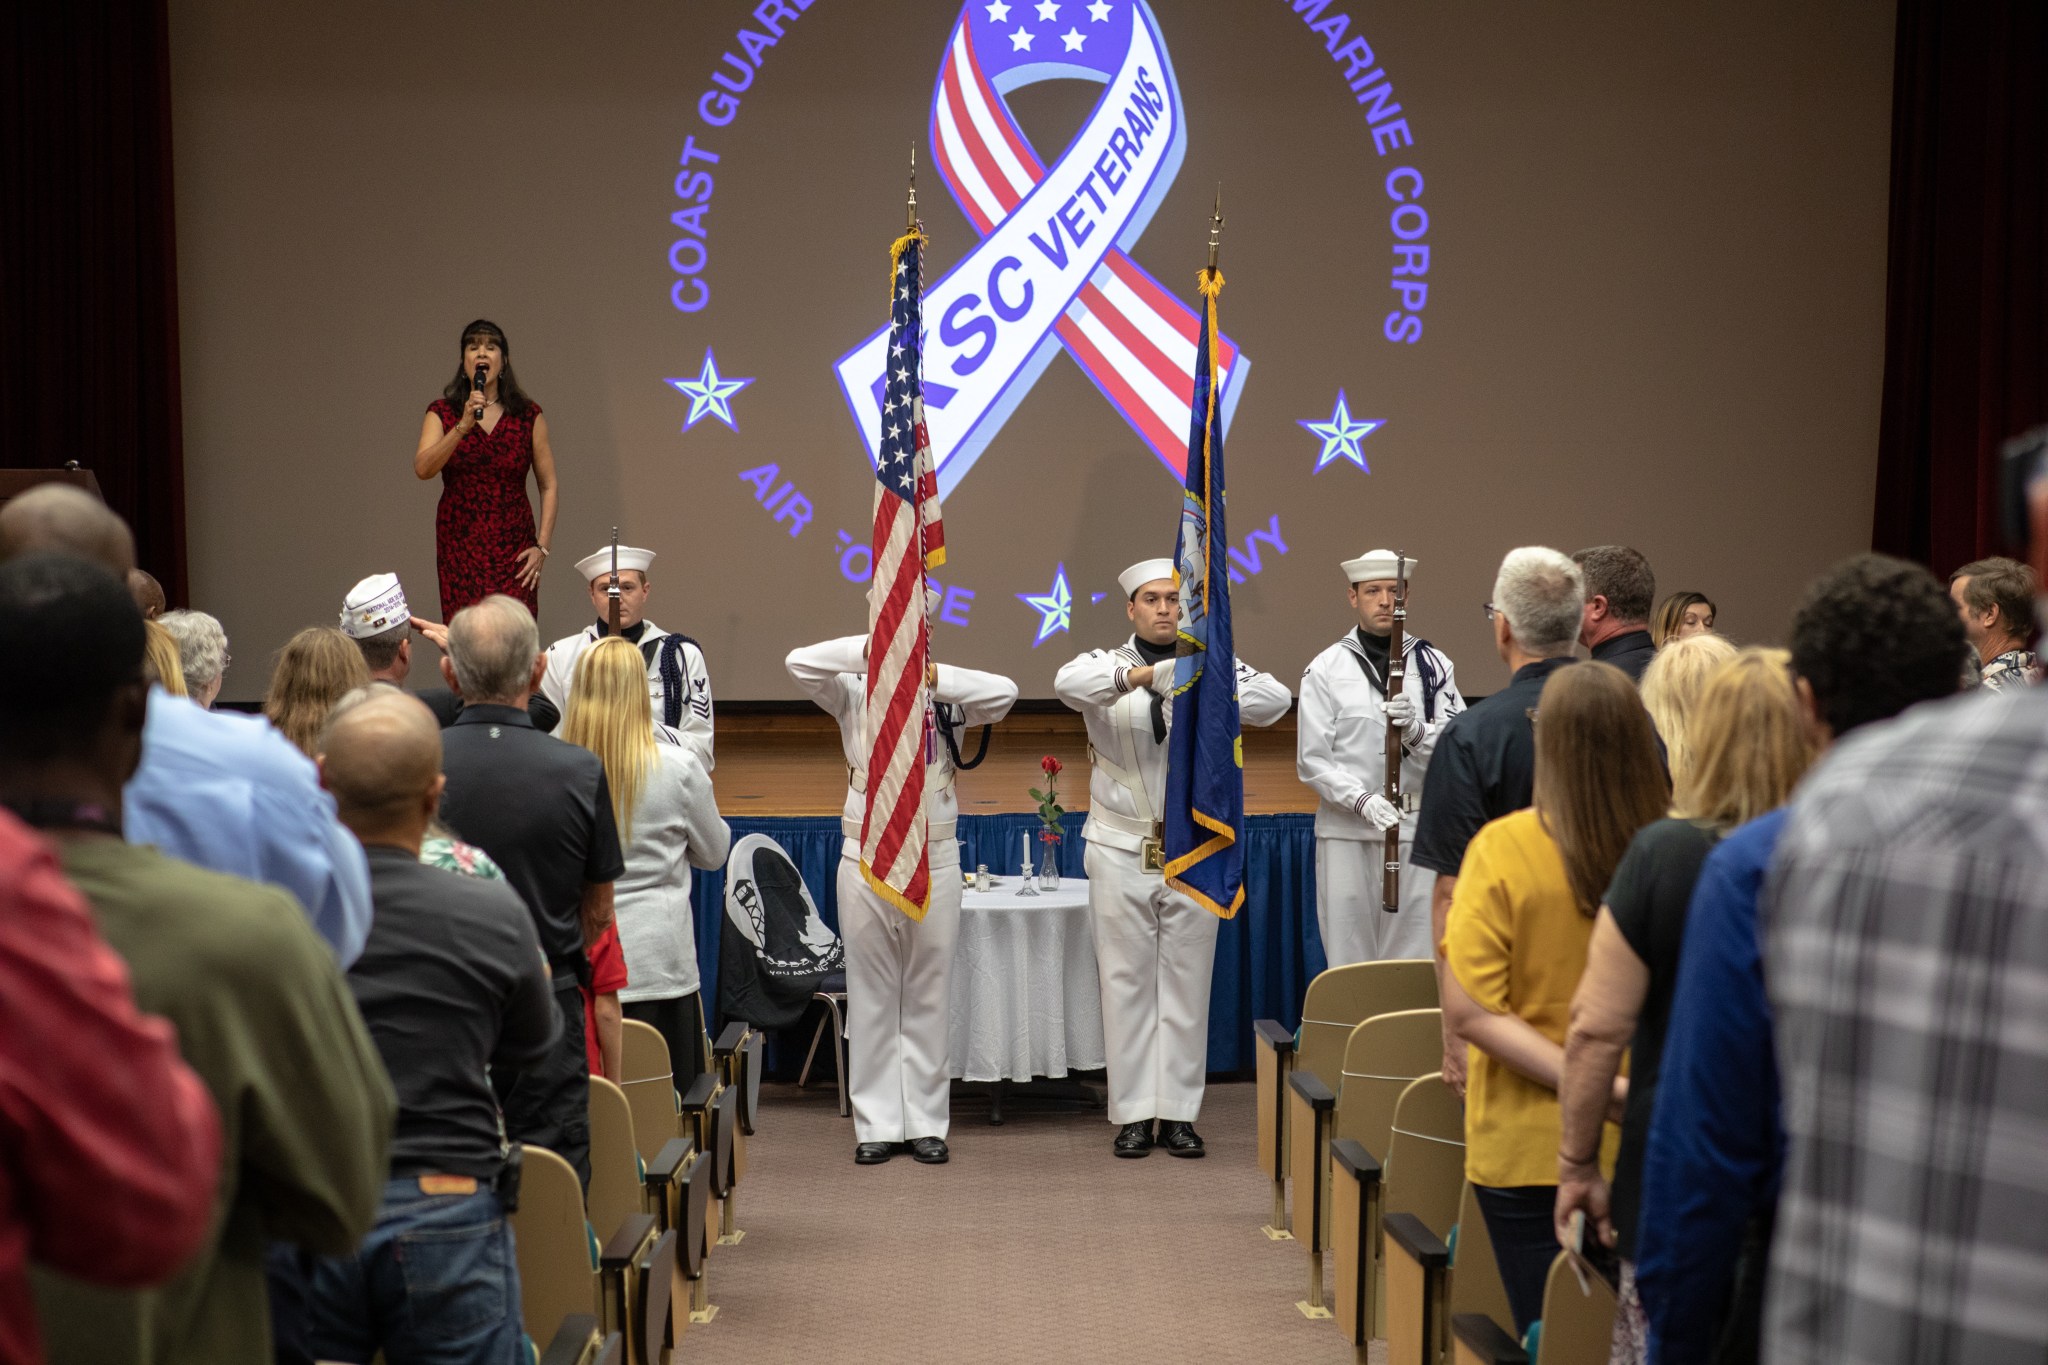 The National Anthem is sung by Suzy Cunningham during a Veterans Day observance ceremony on Nov. 7 in the Training Auditorium.